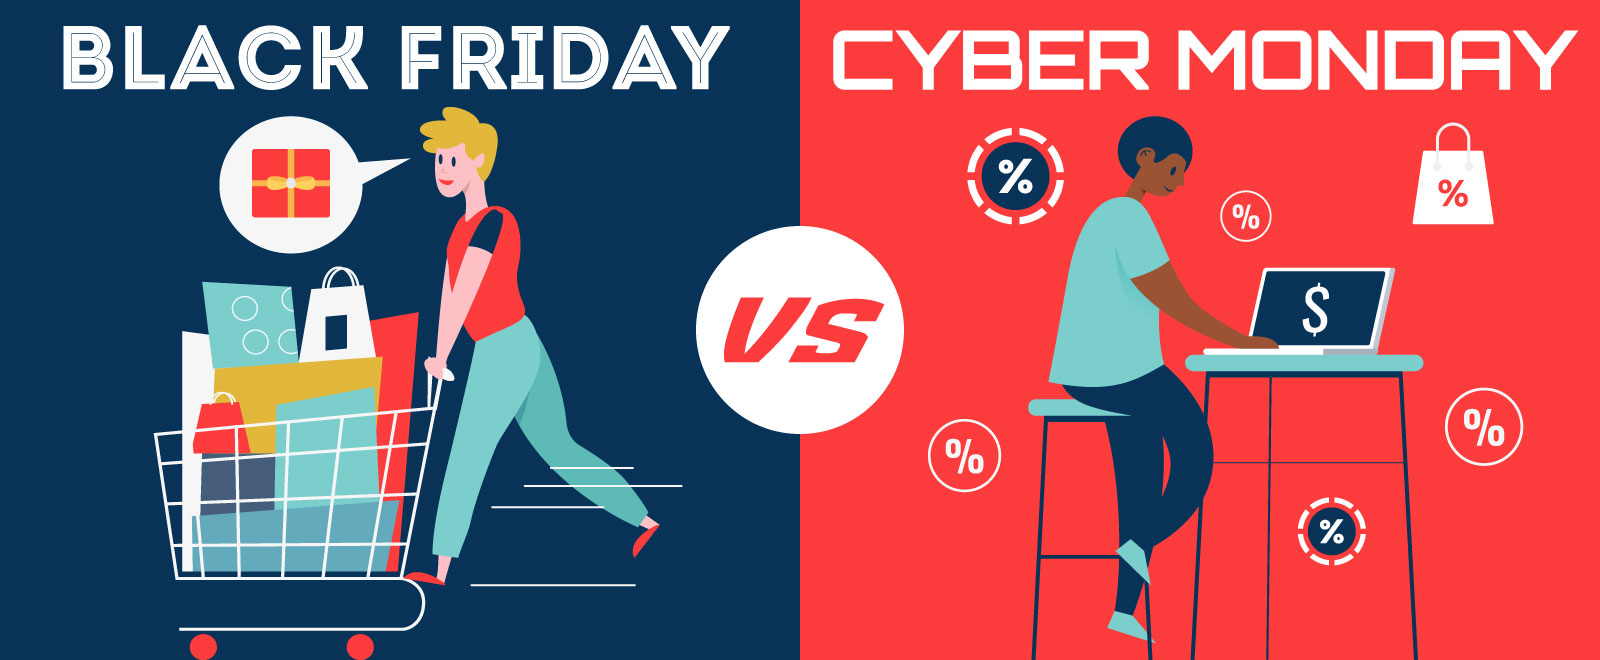 Does cyber monday have the same deals as black friday Easelly Black Friday Vs Cyber Monday A Visual Case Study